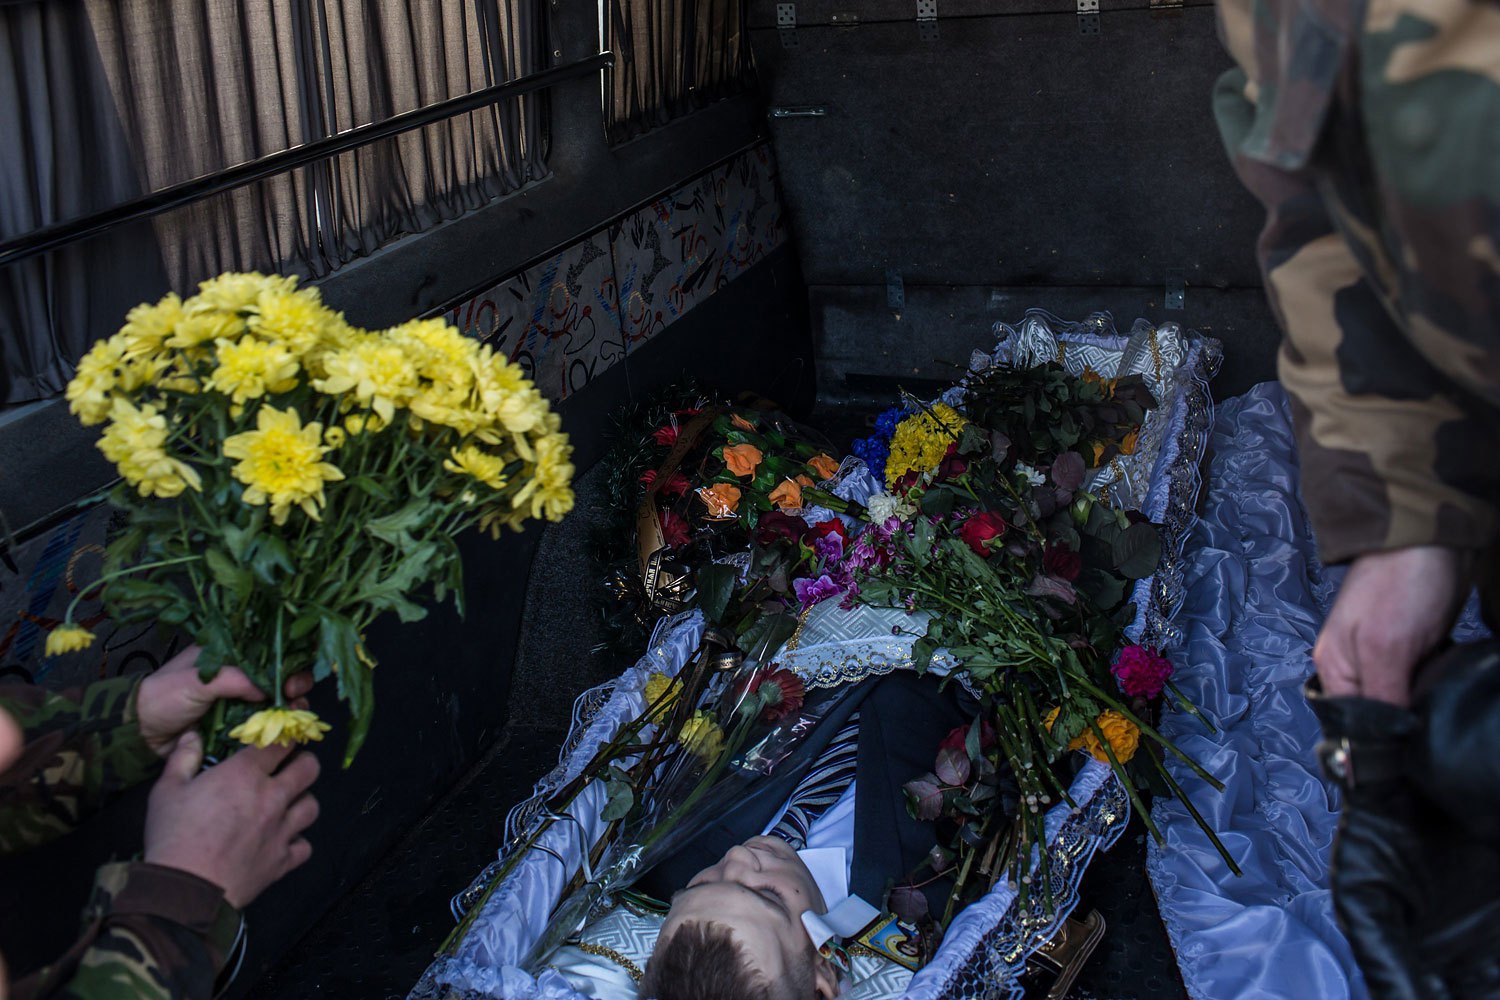 The body of Mikhail Zhiznevsky, 25, an anti-government protester who was killed in clashes with police, rests in the back of a hearse following a memorial service in his honor on Jan. 26, 2014 in Kiev.